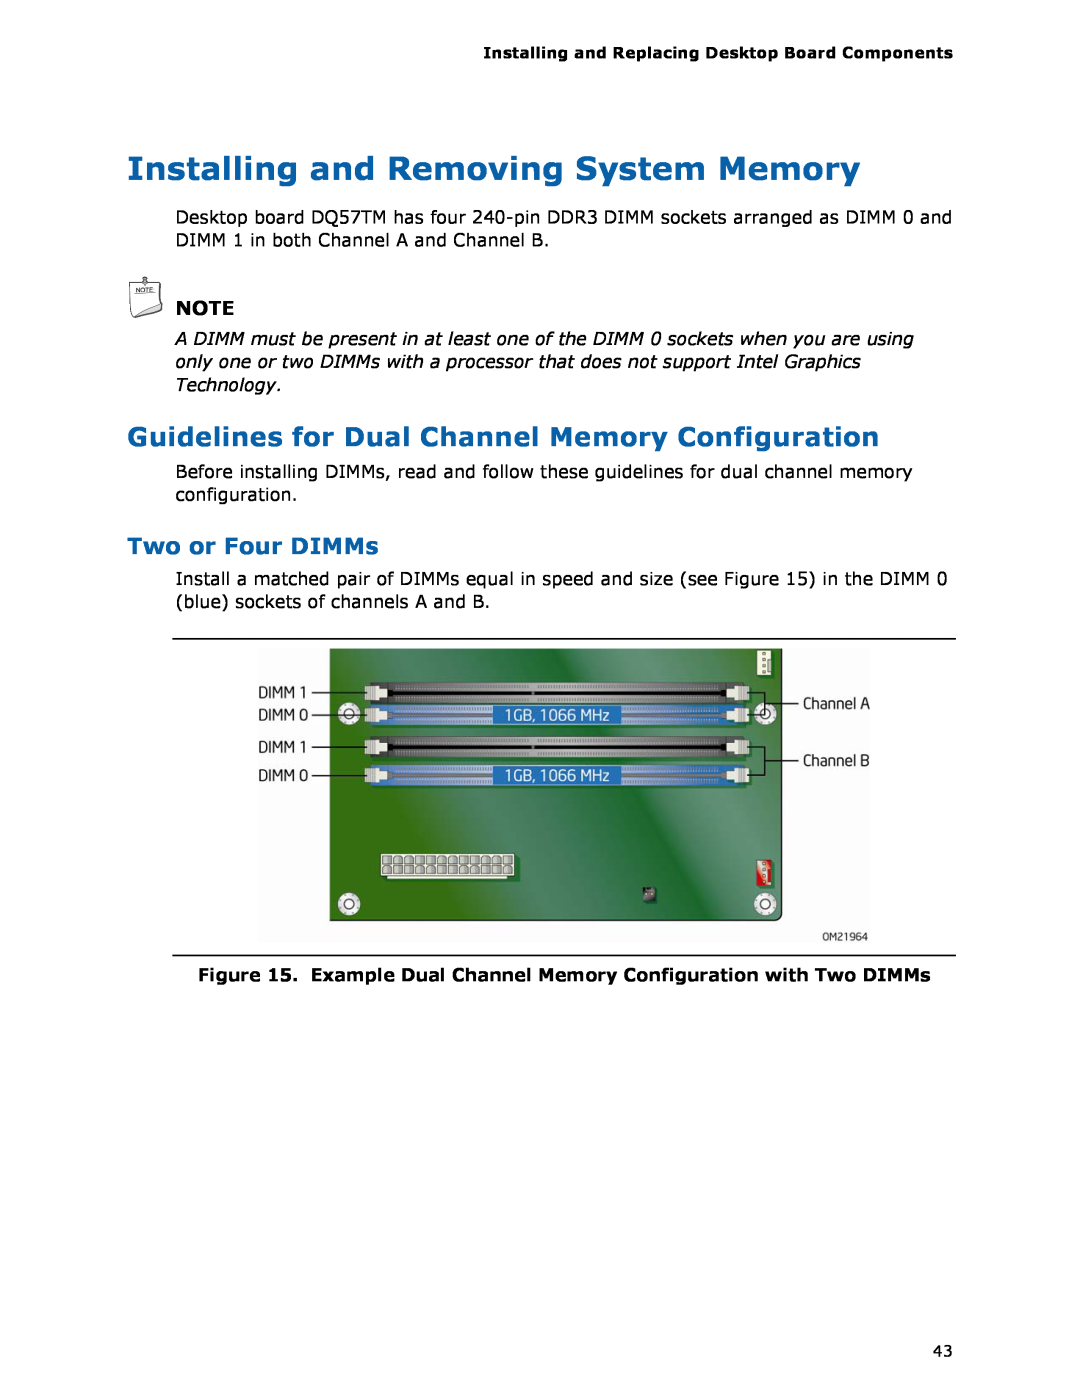 Intel DQ57TM Installing and Removing System Memory, Guidelines for Dual Channel Memory Configuration, Two or Four DIMMs 